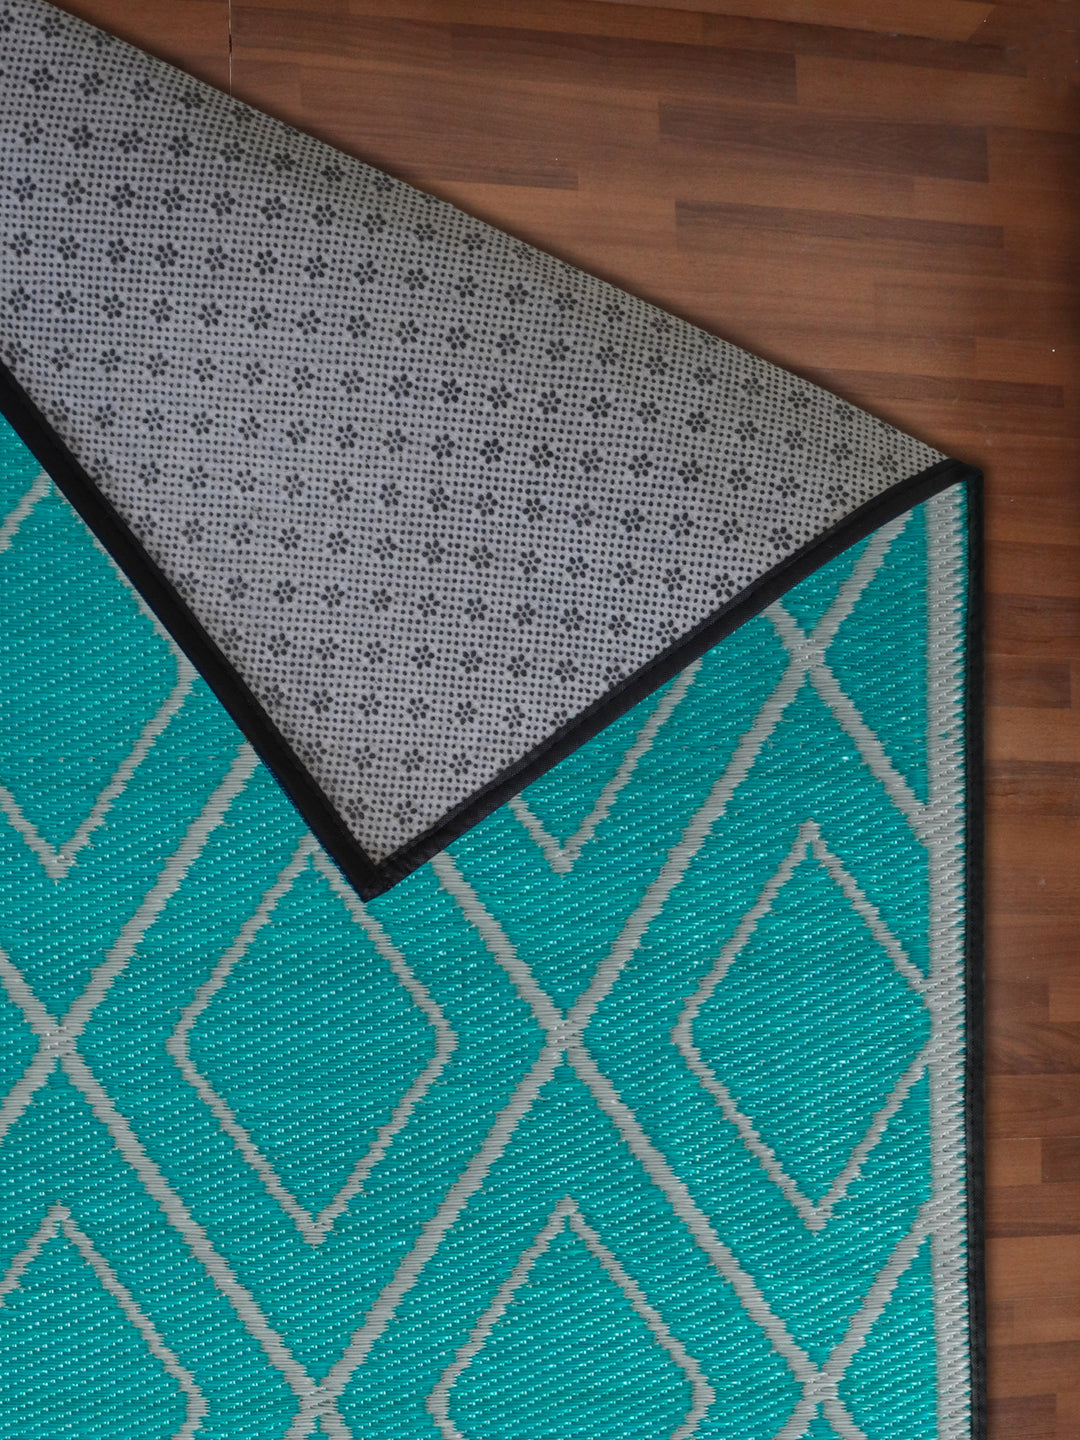 Sea Green With Black Criss Cross Pattern Outdoor